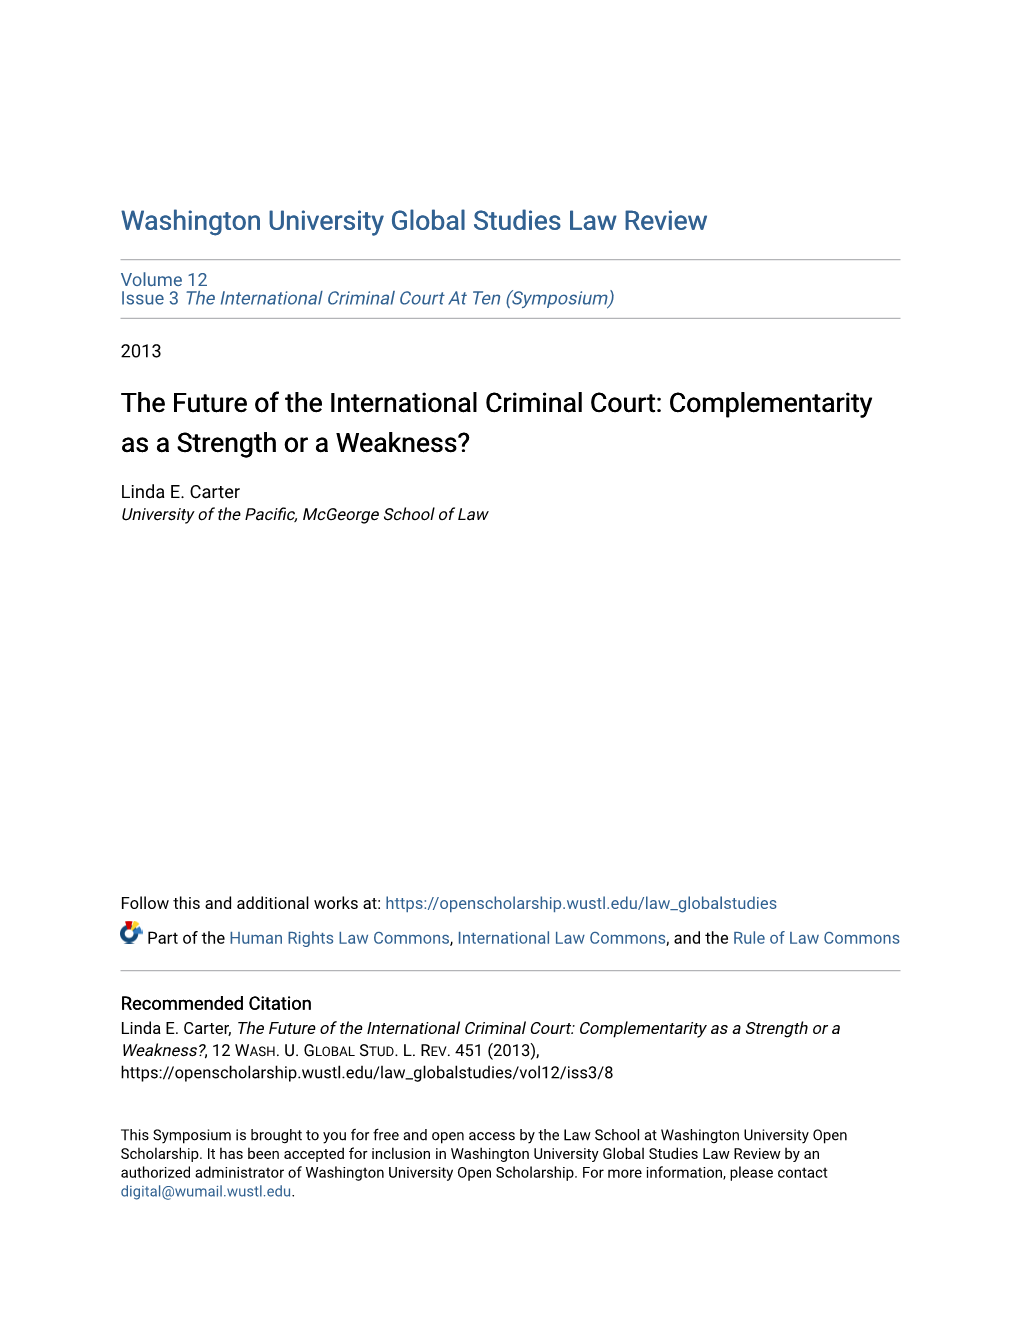 The Future of the International Criminal Court: Complementarity As a Strength Or a Weakness?